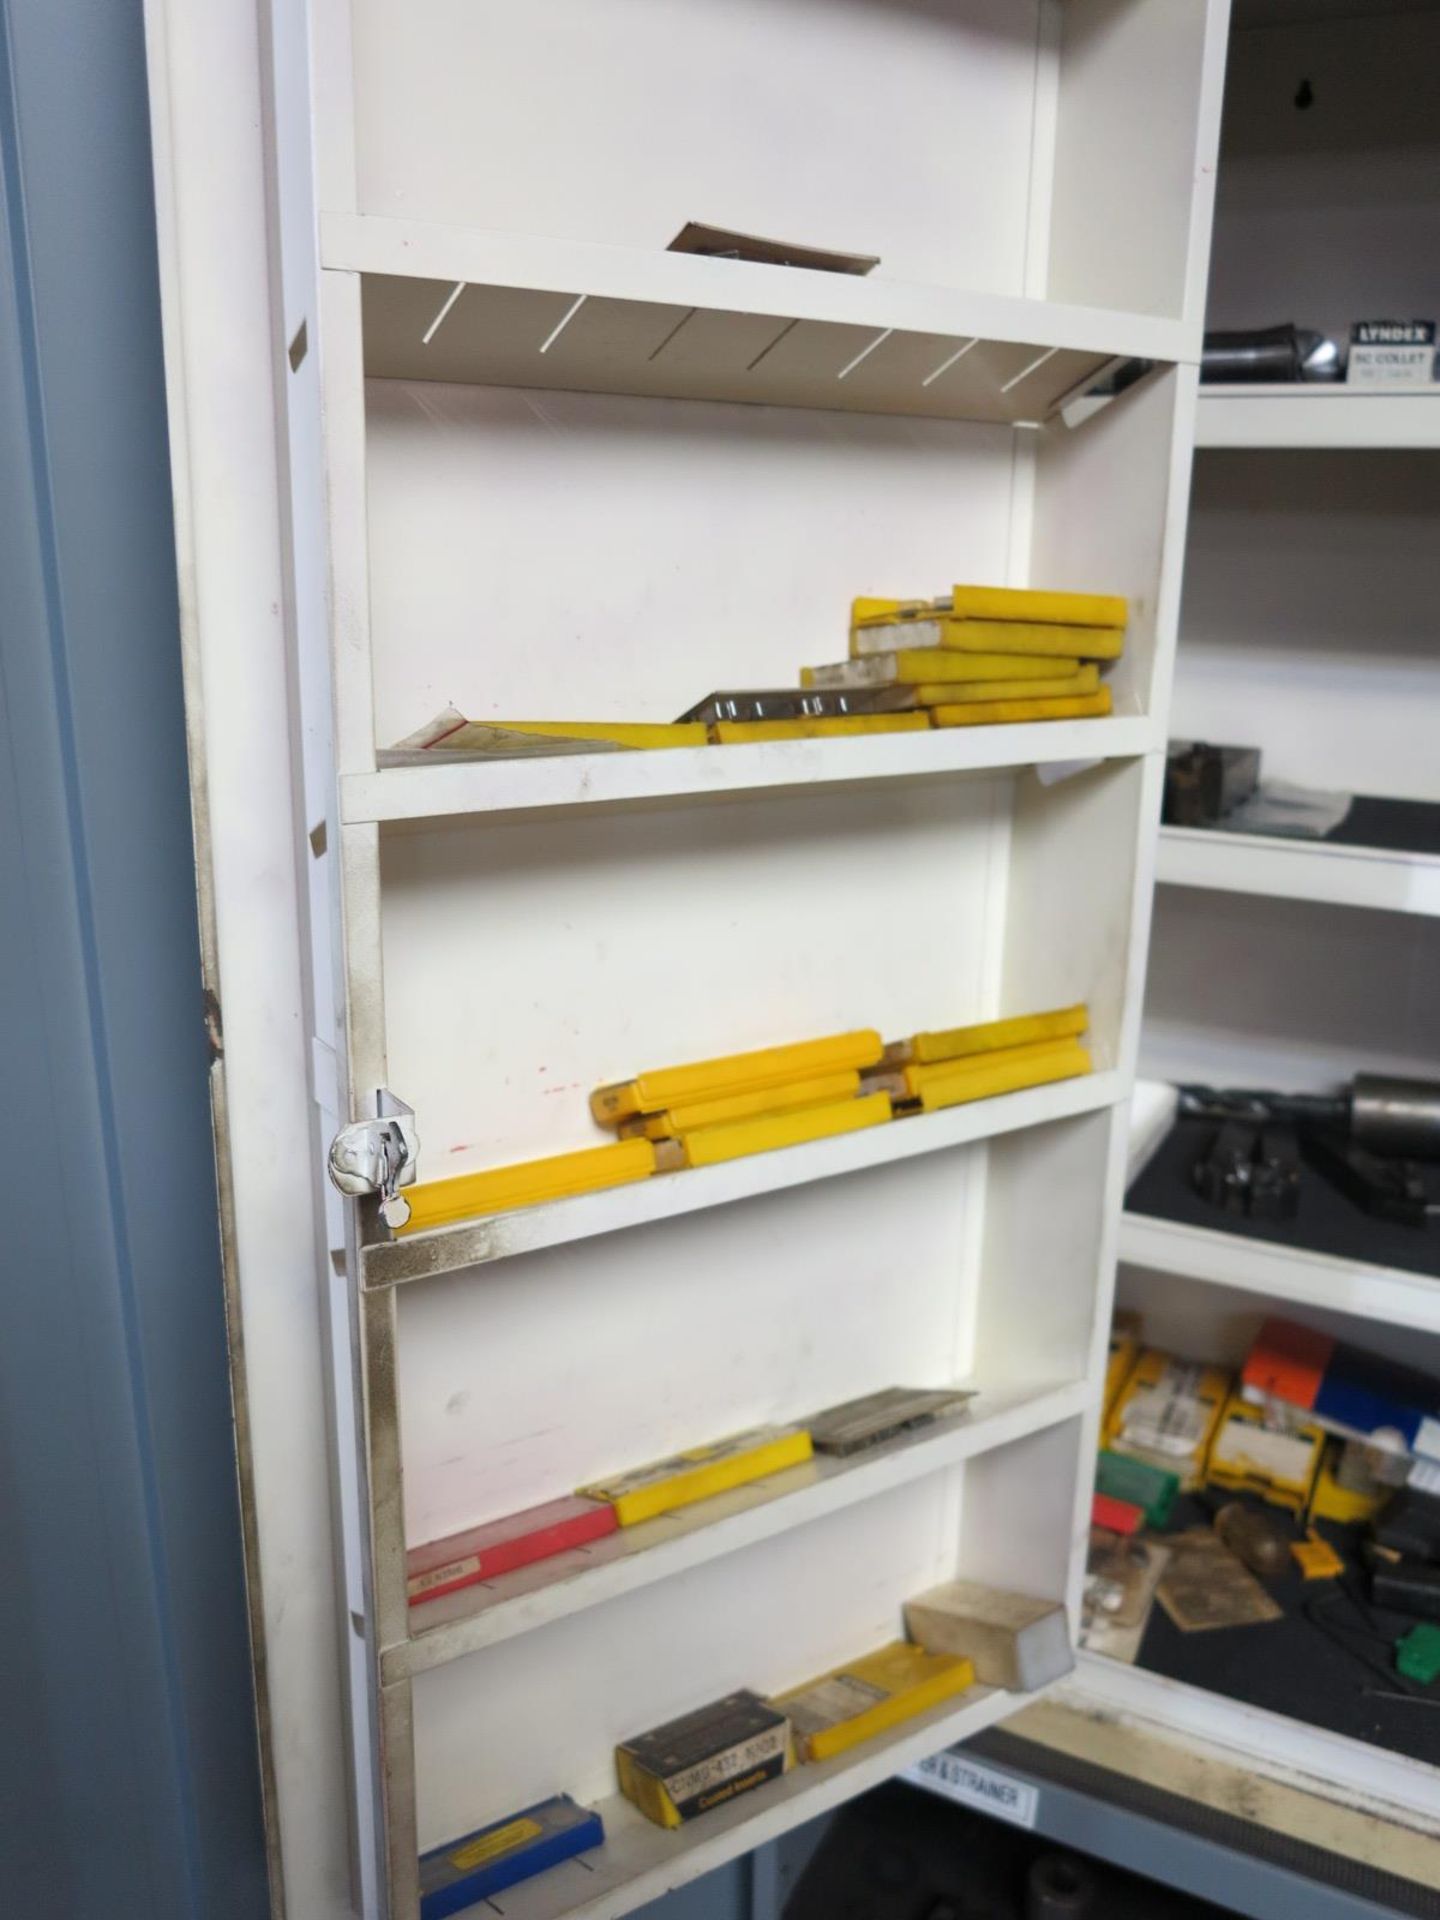 LOT - SMALL 2-DOOR CABINET FULL OF LATHE TOOLING, INSERTS, 5C COLLETS, BORING BARS, ETC. - Image 4 of 5